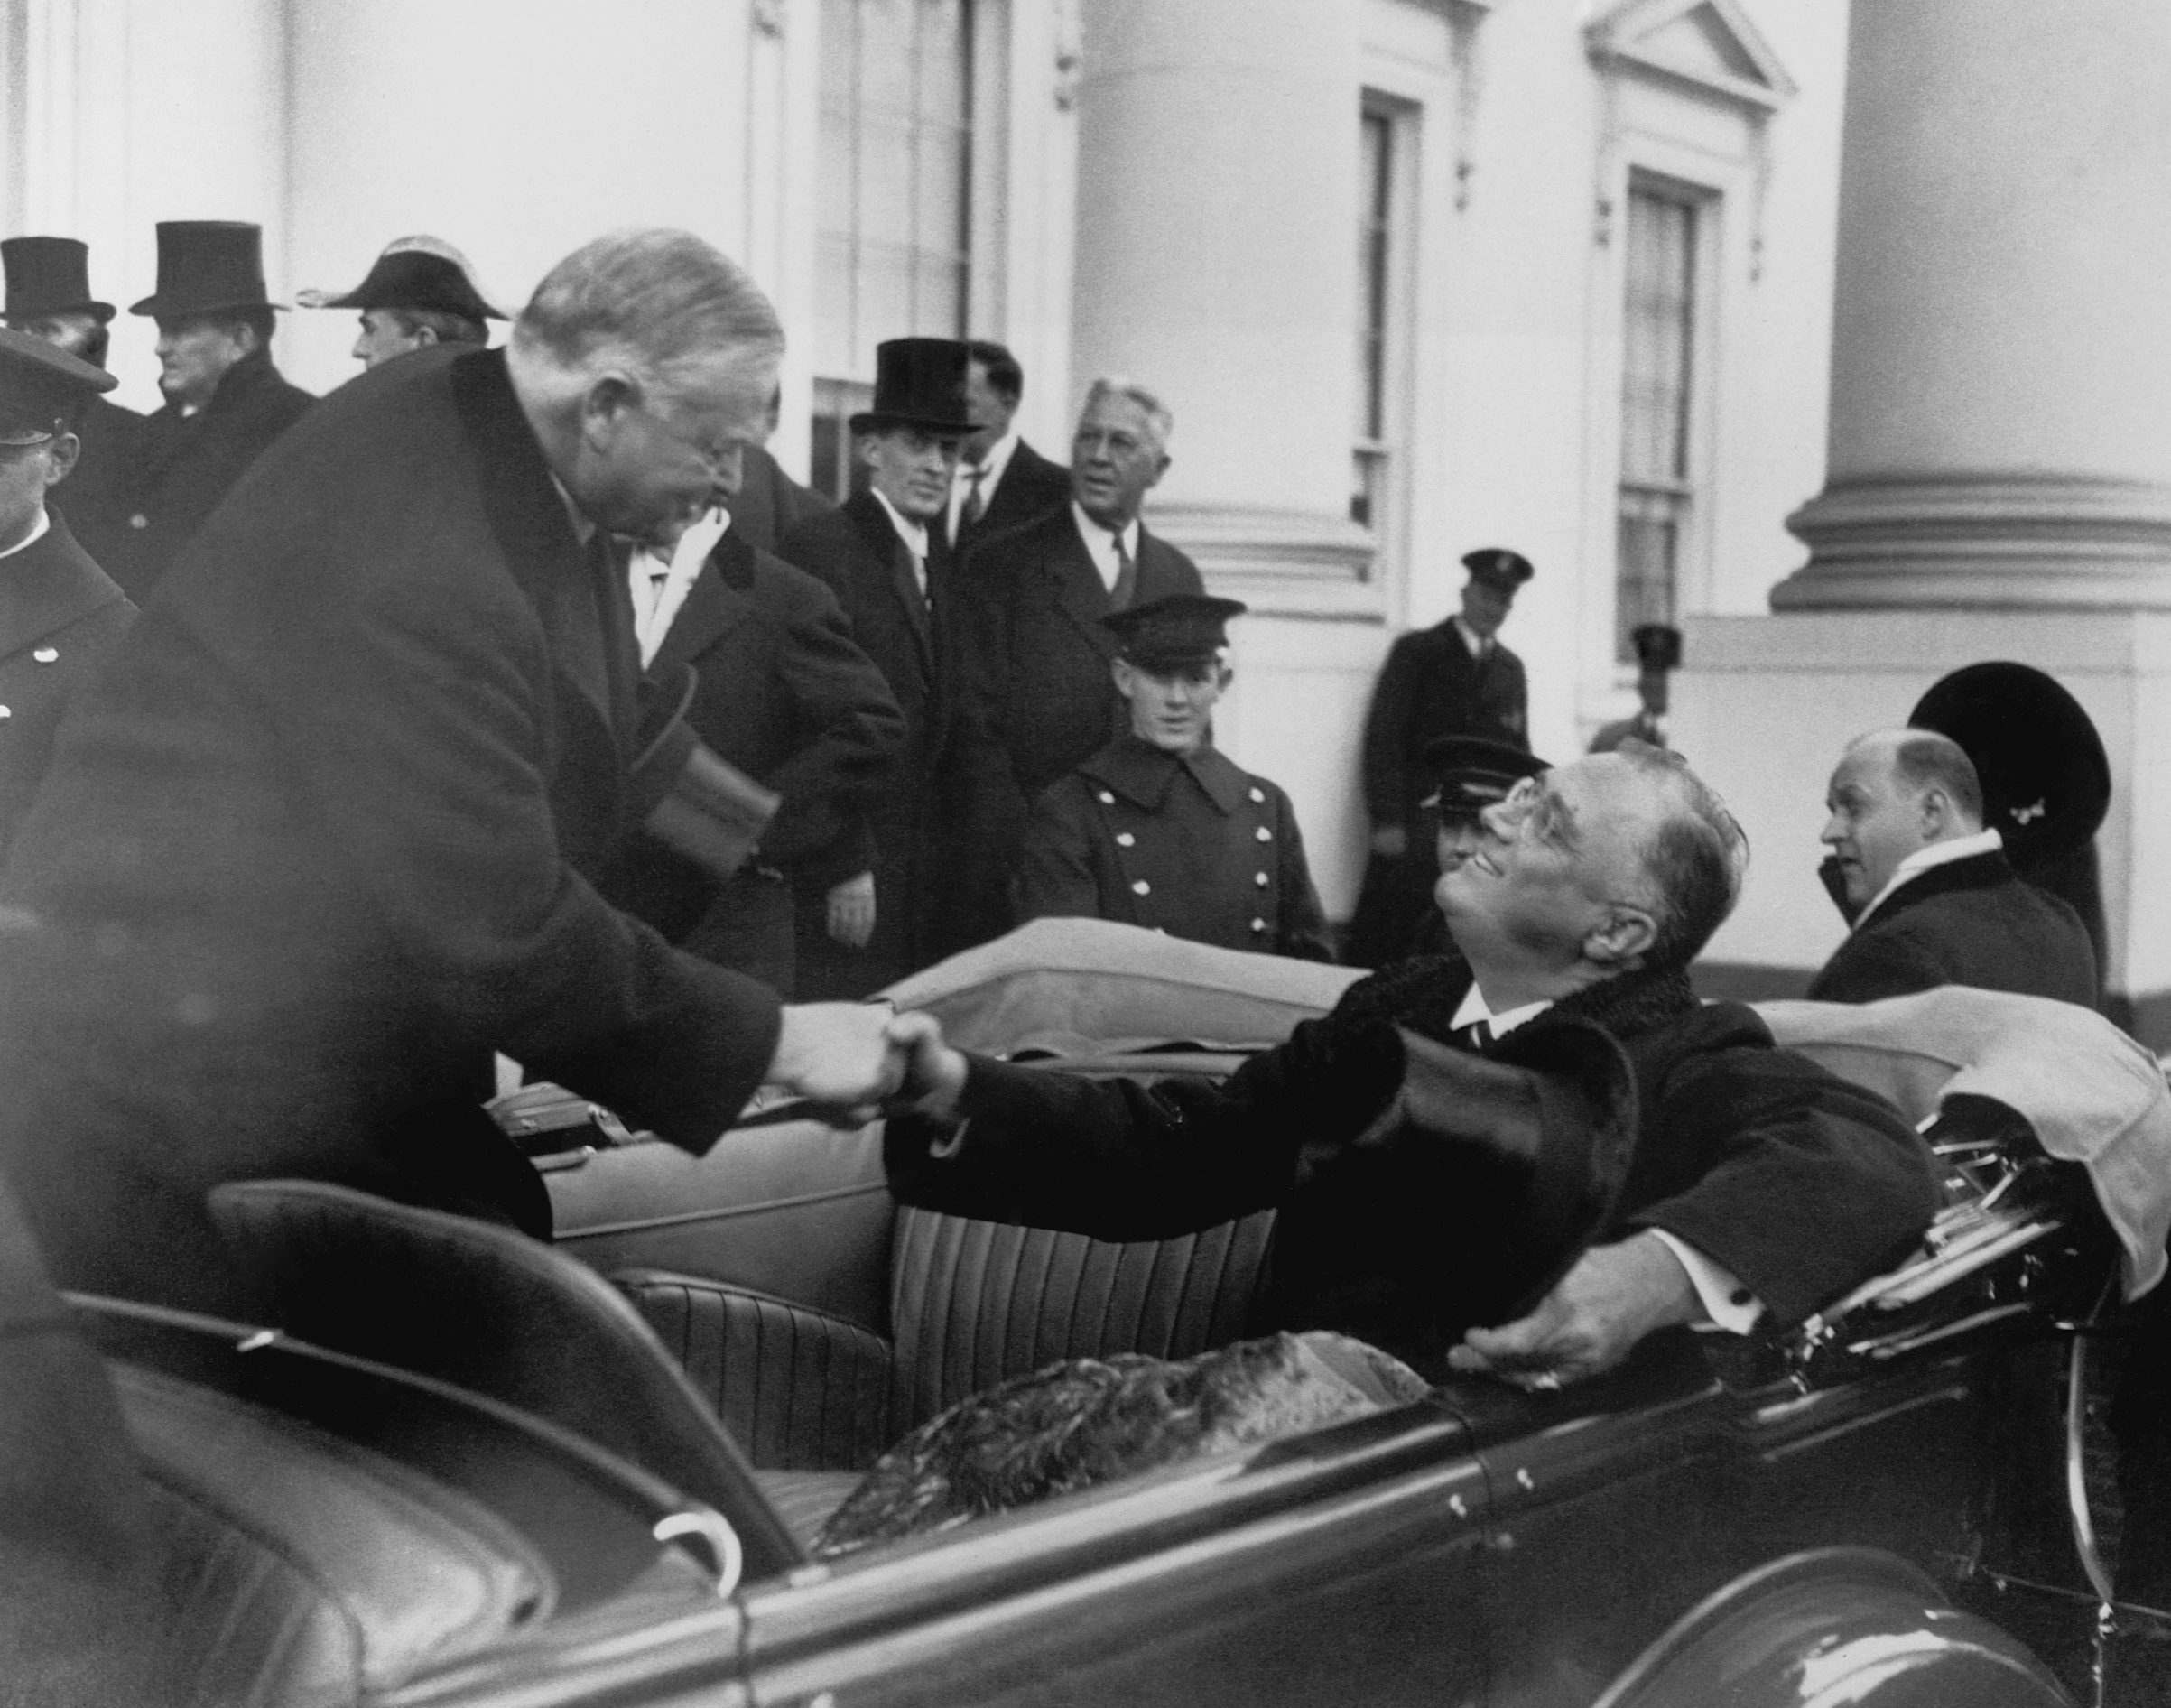 Outgoing President Herbert Hoover shakes the hand of incoming Franklin Roosevelt after Roosevelt's inauguration (Bettmann/Getty Images)